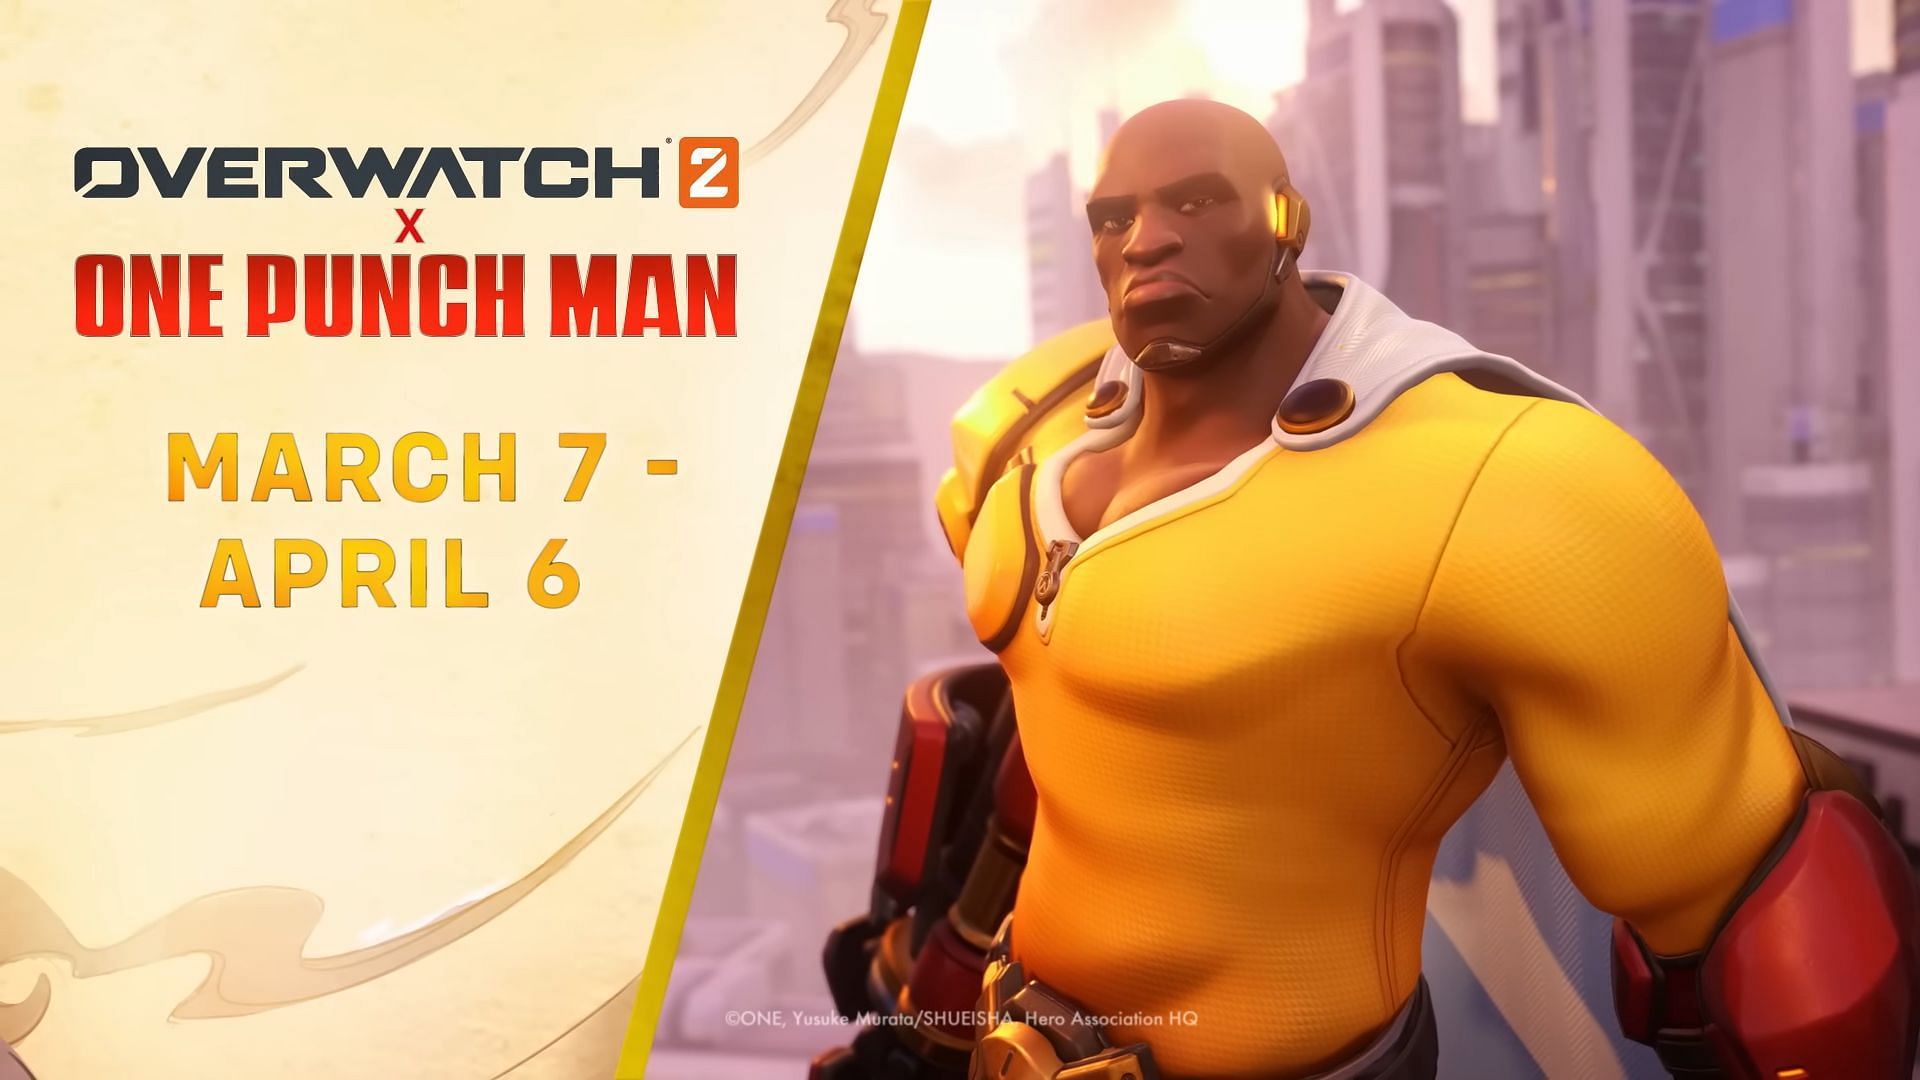 Season 3 trailer revealed collaboration between Overwatch 2 and One Punch Man (Image via Bizzard)